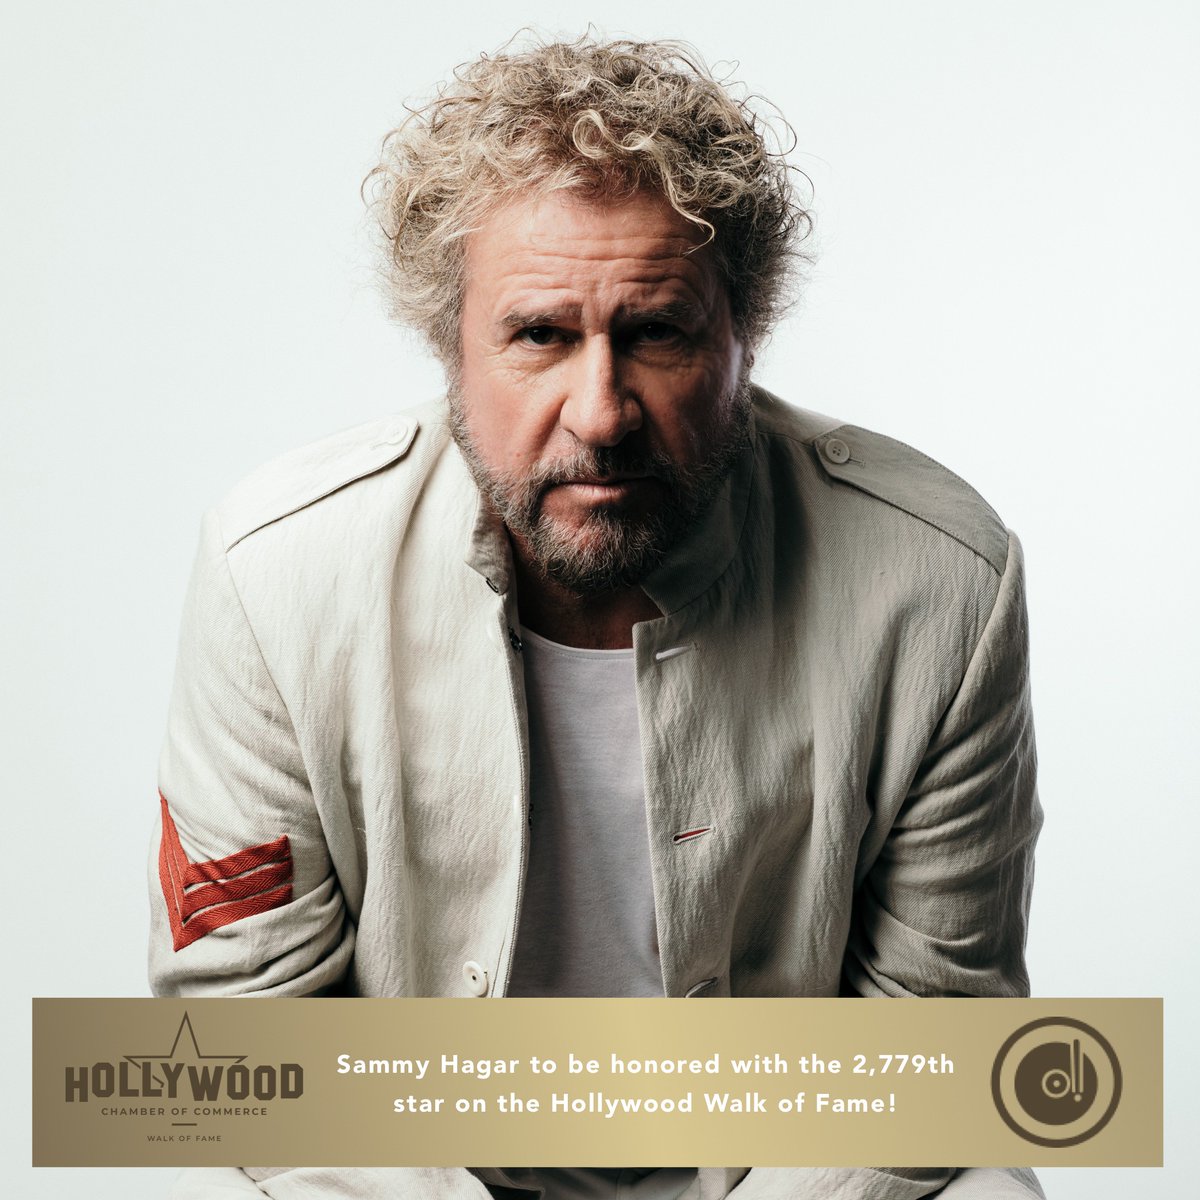 The Hollywood Chamber of Commerce will honor rocker Sammy Hagar with the 2,779th star on the Hollywood Walk of Fame on Tuesday, April 30, at 11:30 am PT. Star will be located at 6212 Hollywood Boulevard. Hagar will receive his star in the category of Recording.